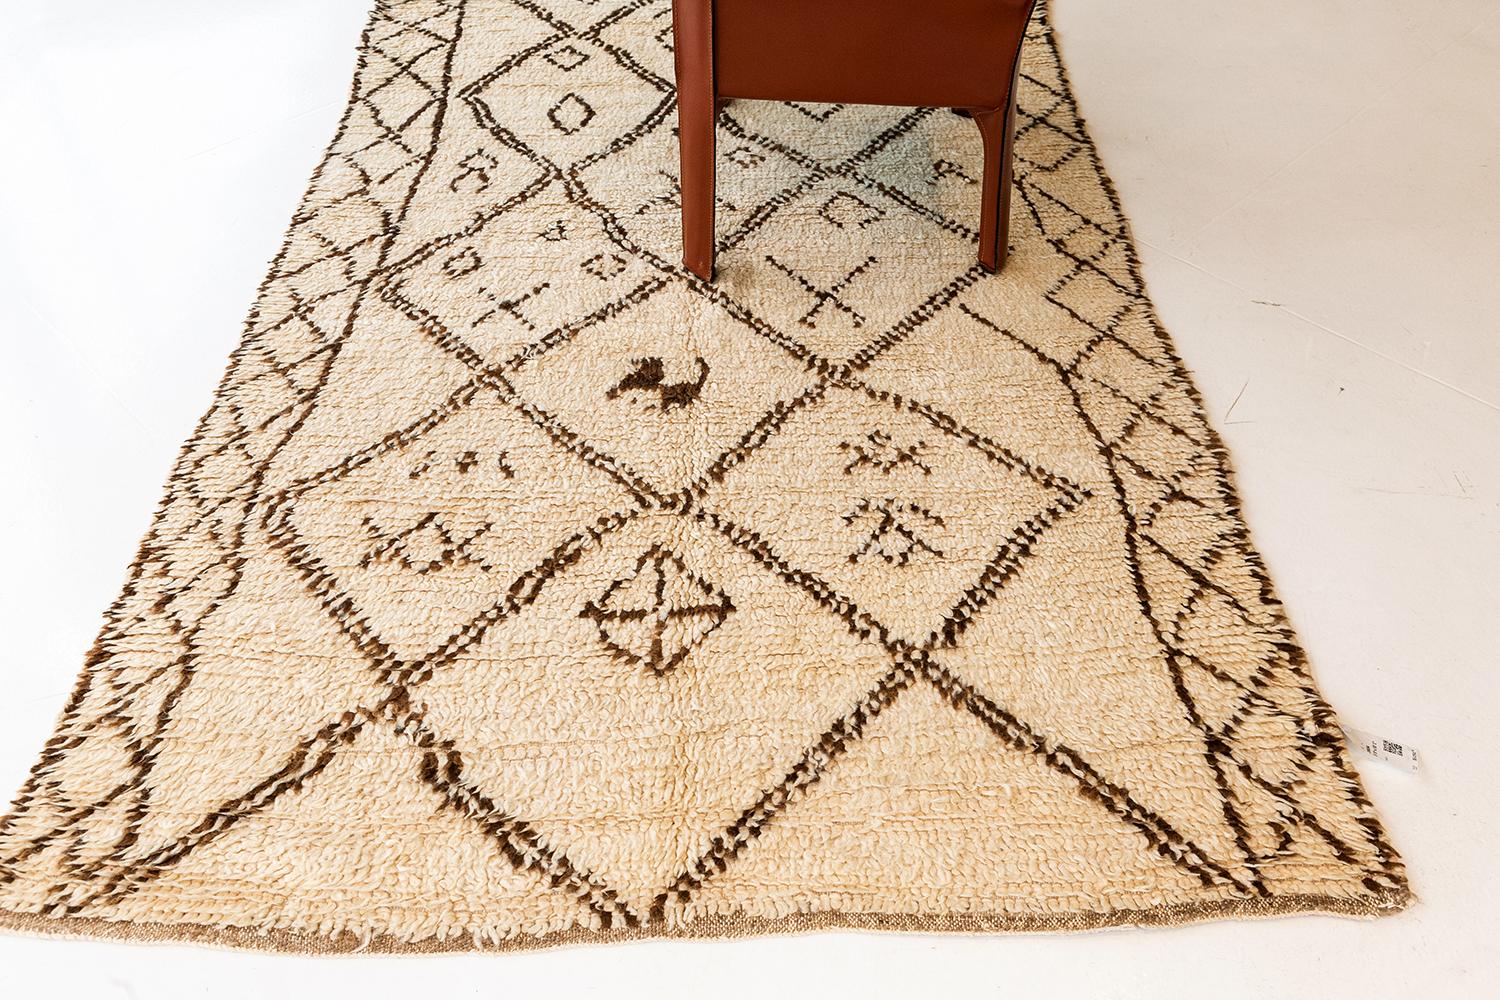 This Vintage Moroccan Azilal Tribe Rug highlights the ancient Berber motifs composed of lozenge trellis and eye motifs. Such symbolisms pertains to femininity, masculinity and fertility that is well established by their culture. With its creamy